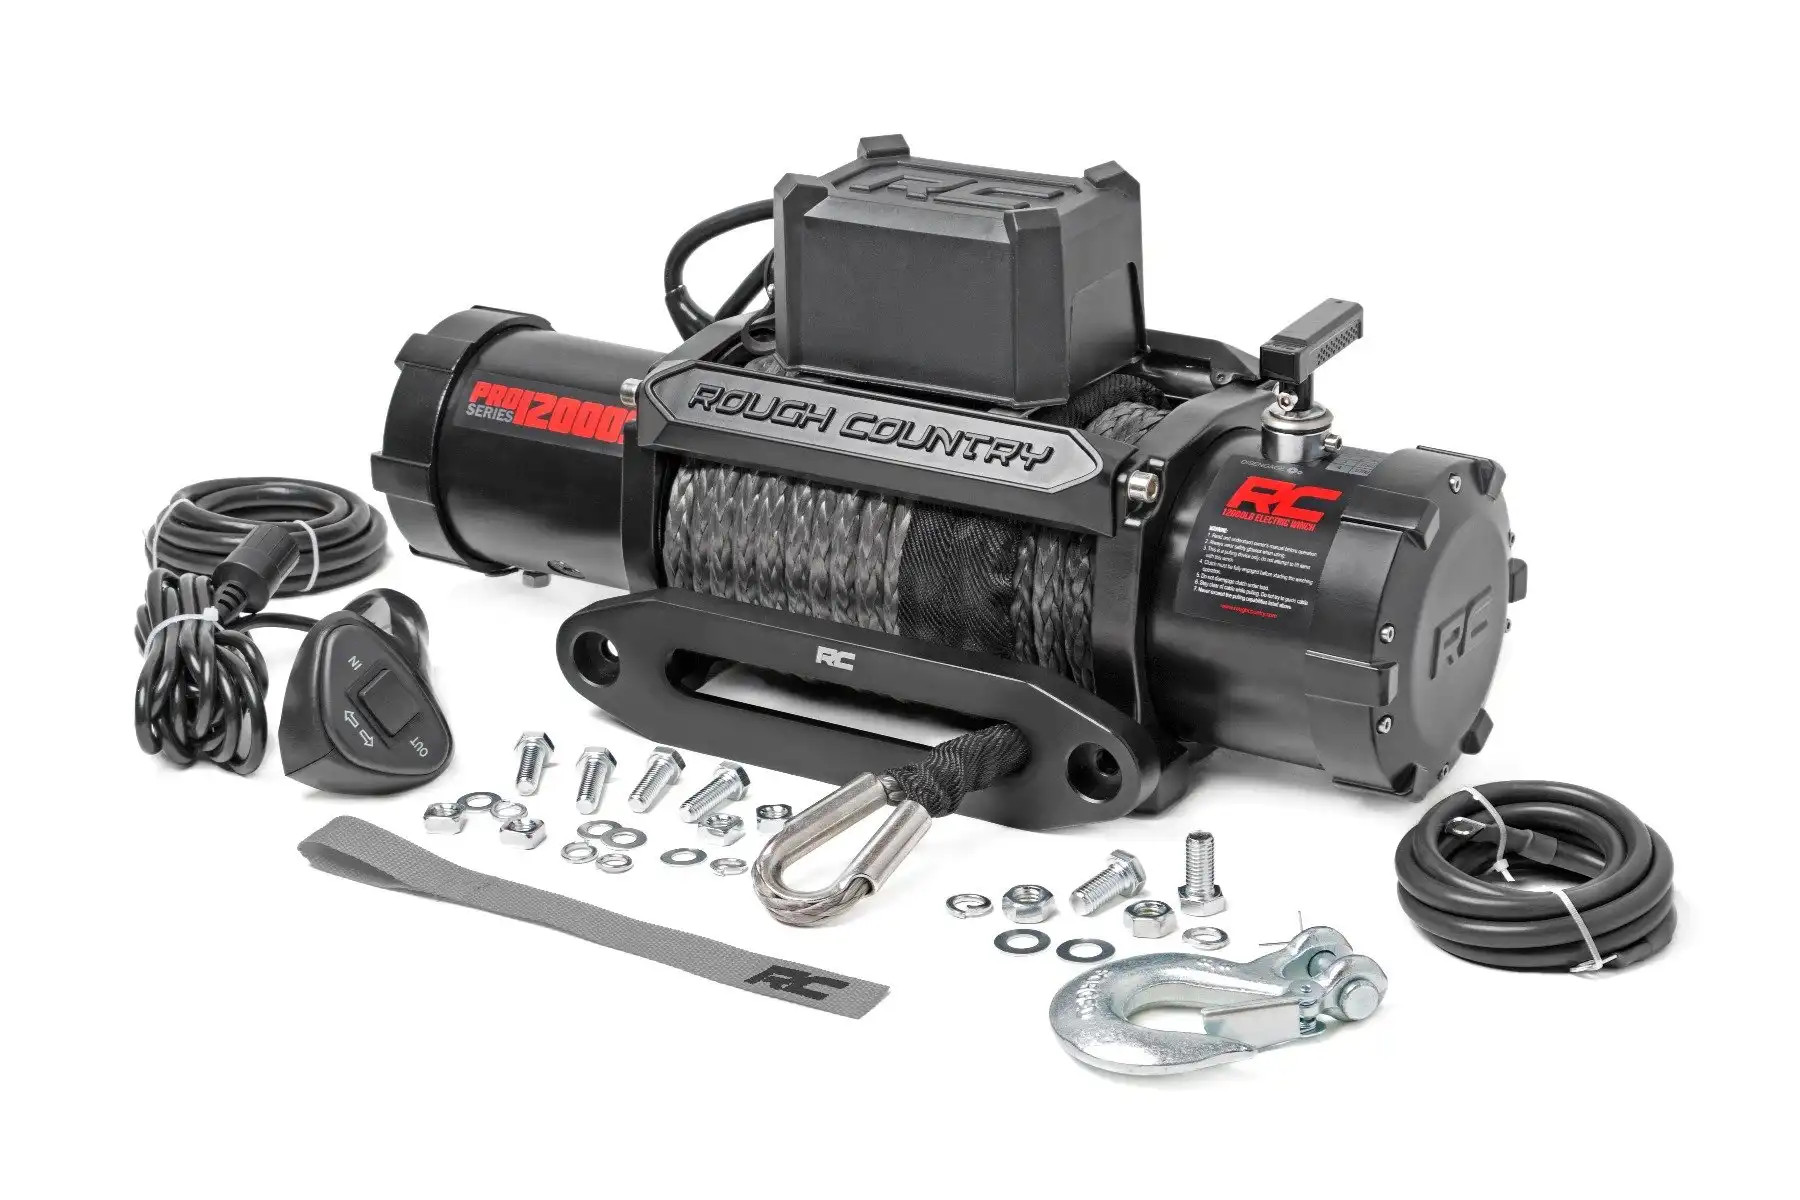 Rough Country 12000-Lb Pro Series Winch